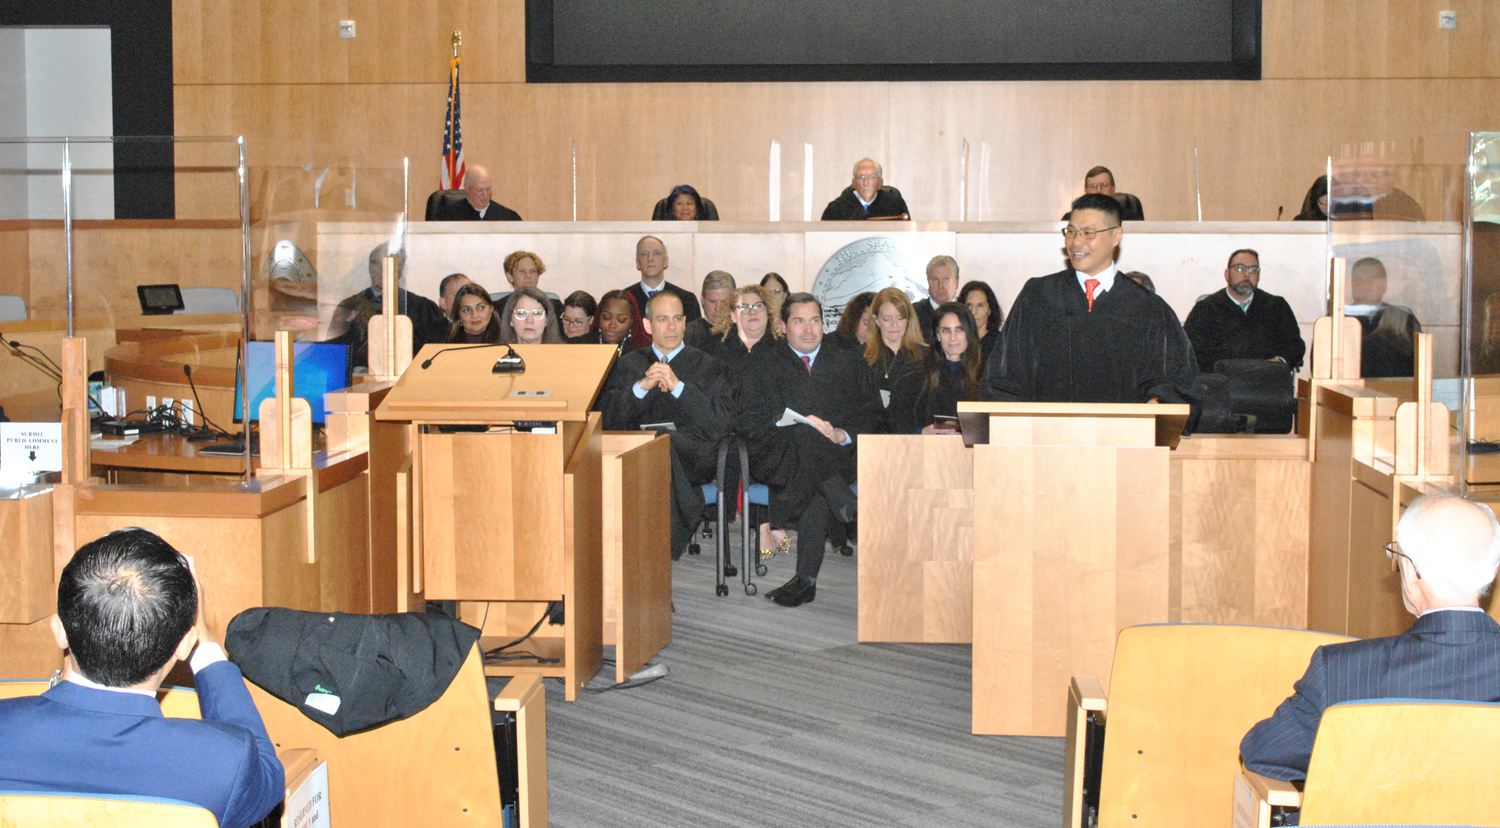 The induction ceremony for new superior court Judge Peter Chang. Glenn Kim was the MC.